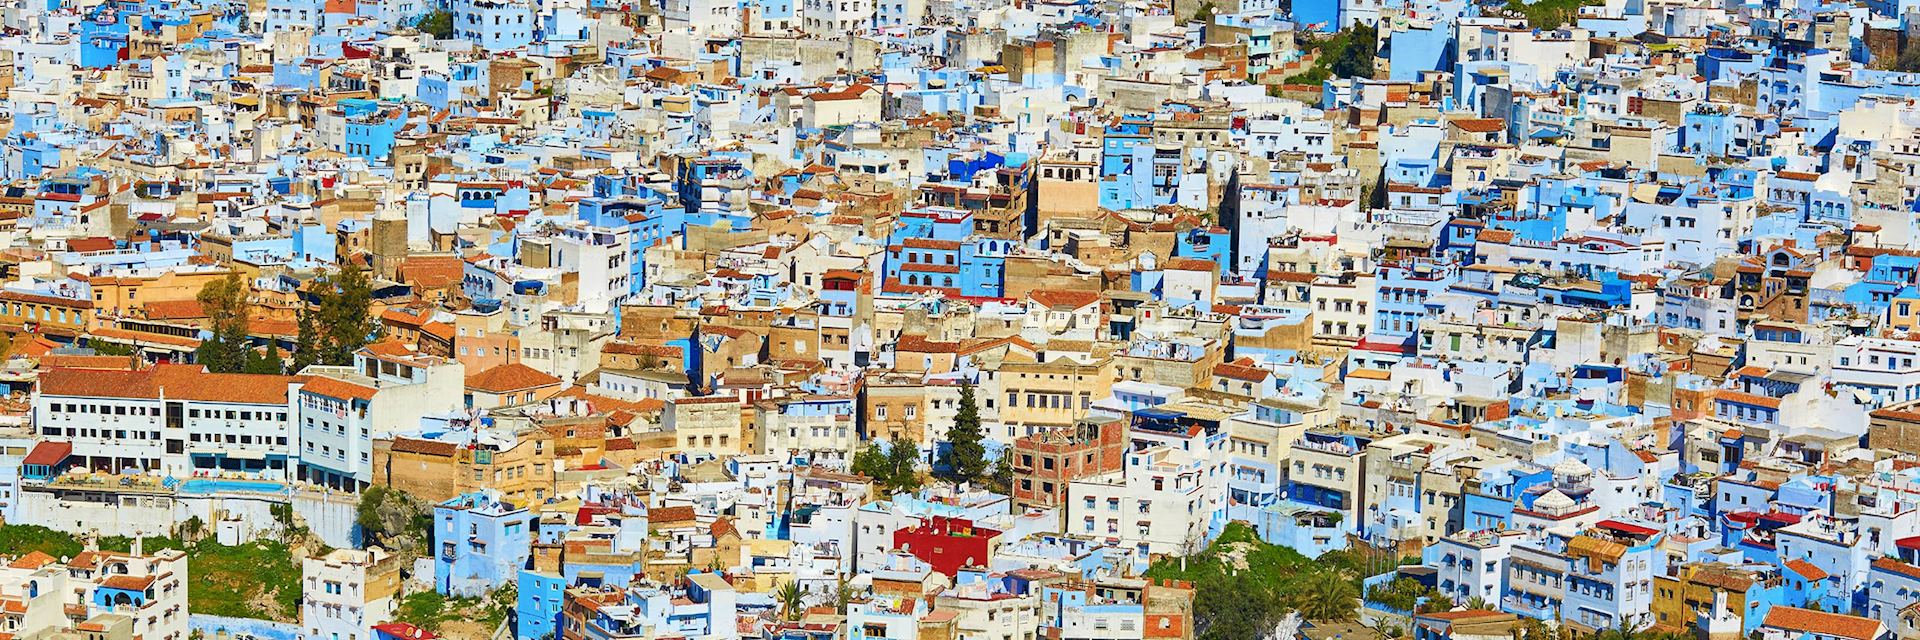 Blue and whitewashed buildings, Chefchaouen